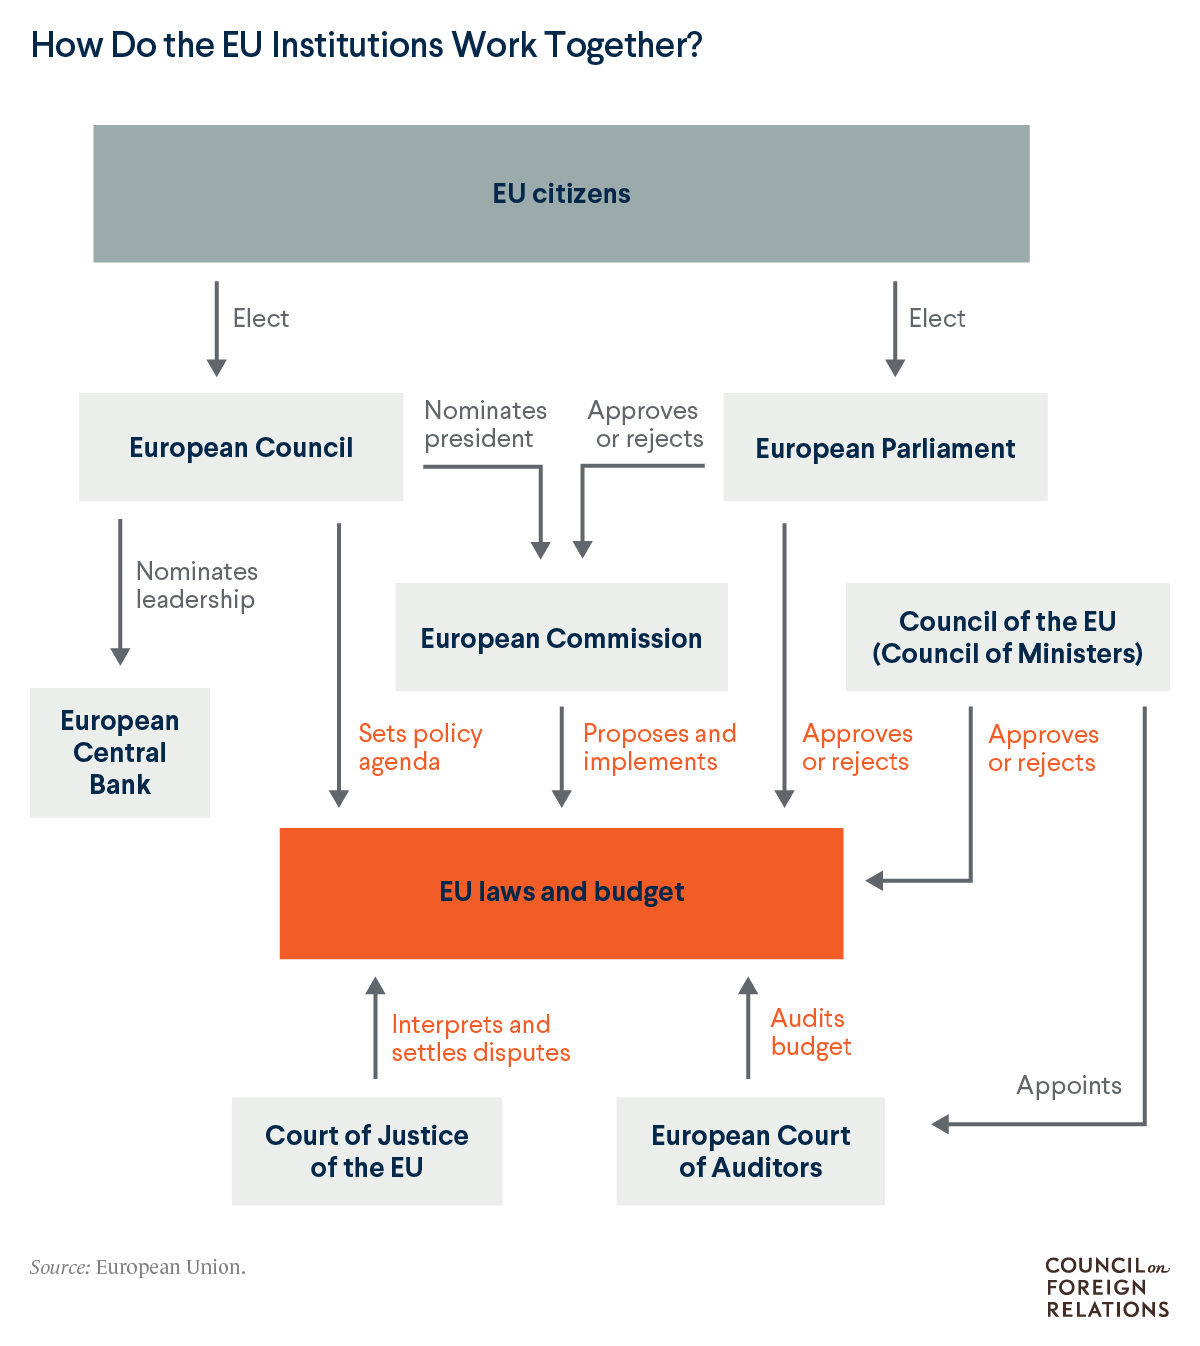 How Does the European Union Work? | Council on Foreign Relations